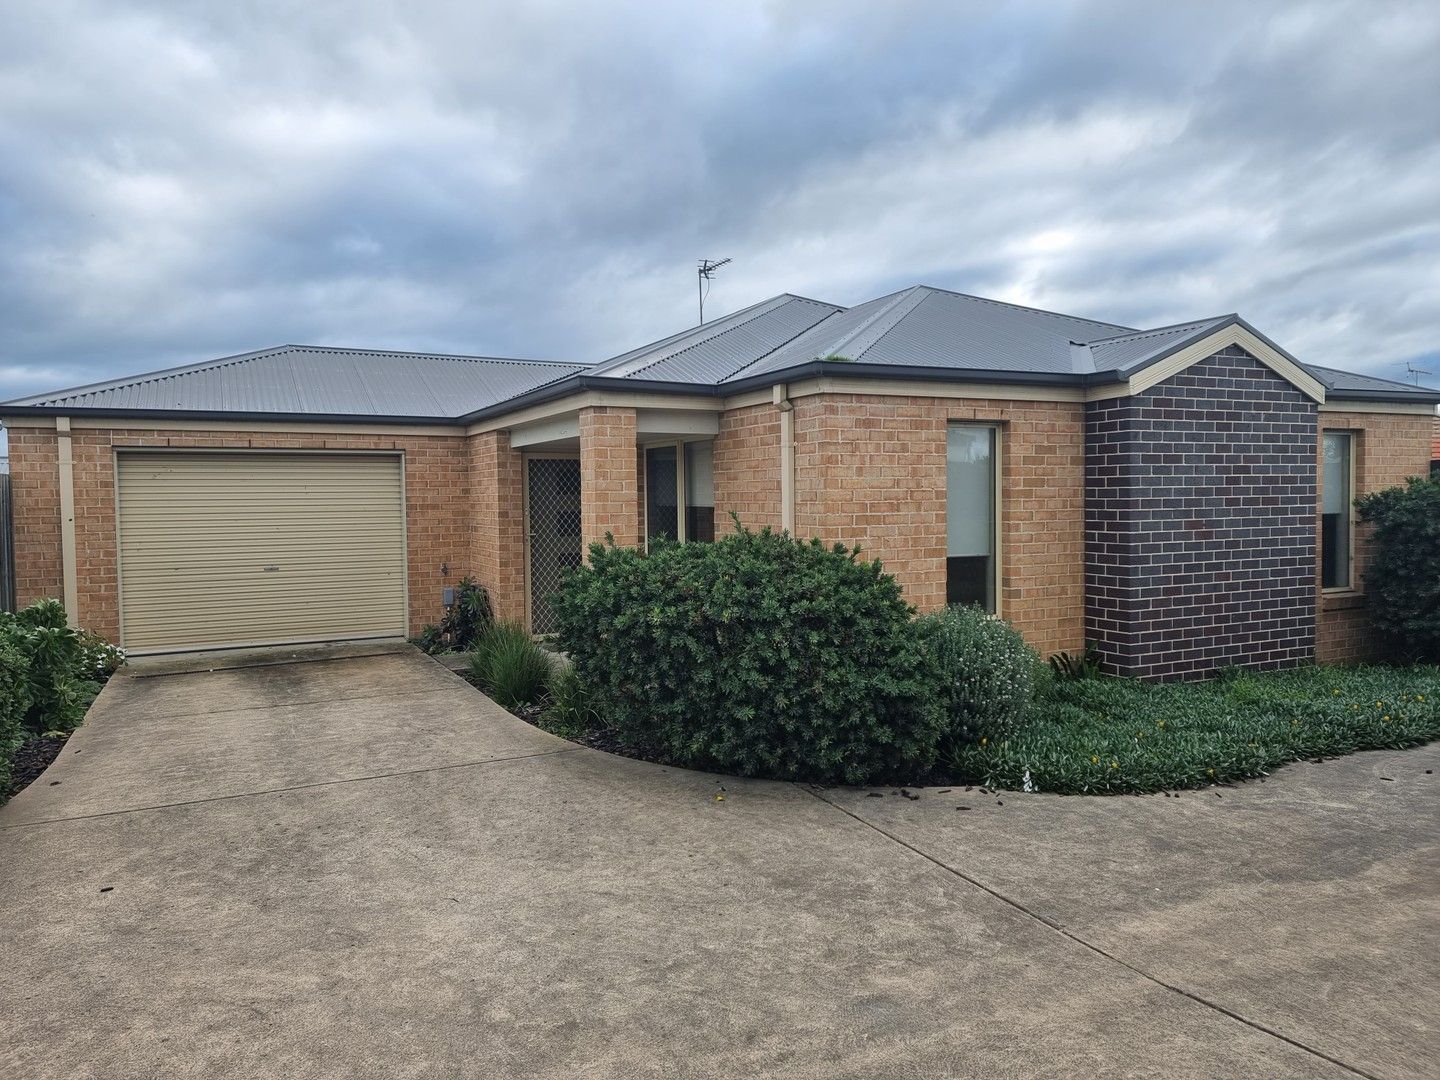 2 bedrooms House in 5/26-28 Graham Street WONTHAGGI VIC, 3995